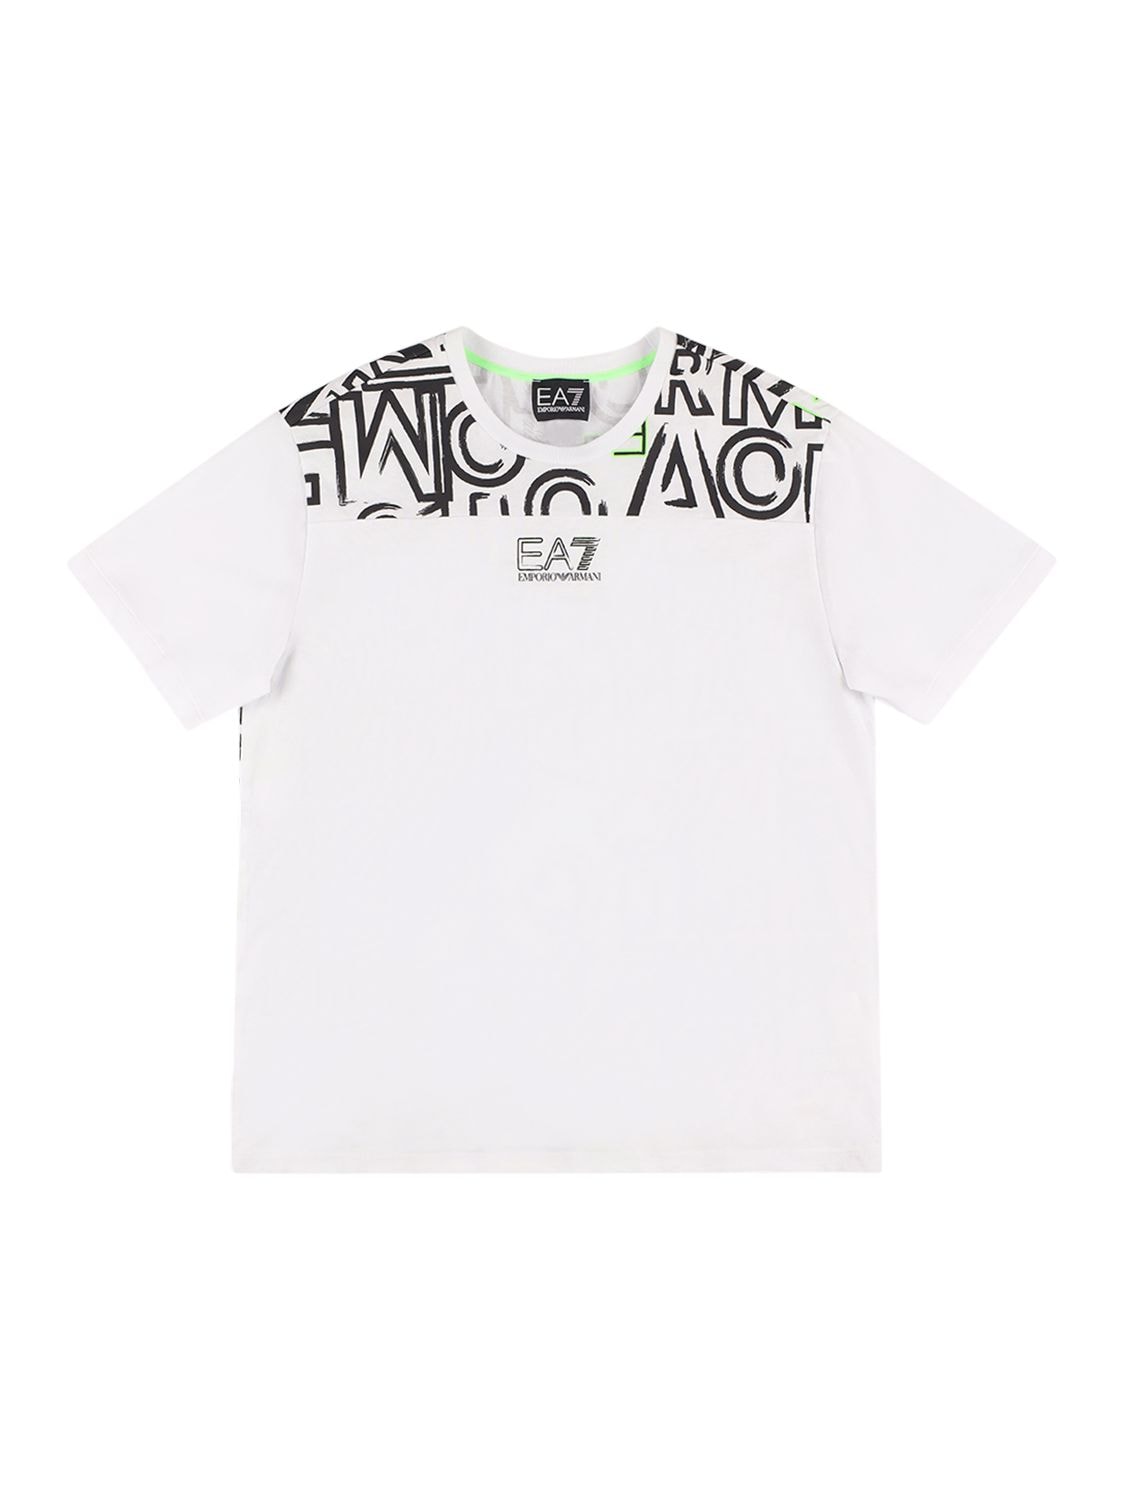 Ea7 Kids' Printed Cotton Jersey T-shirt In White